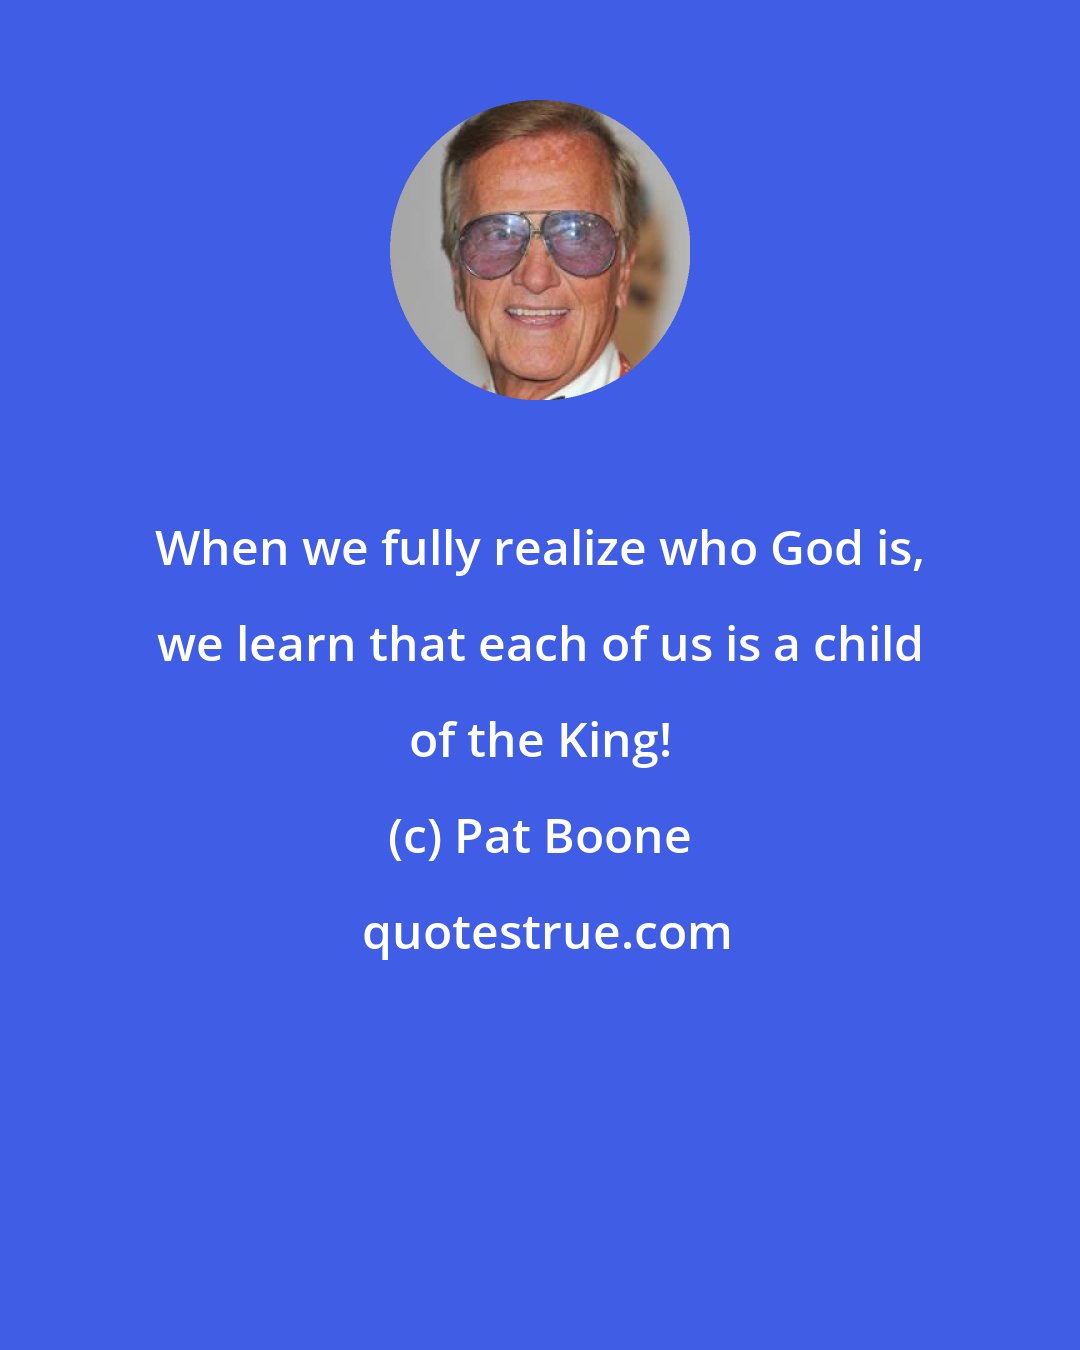 Pat Boone: When we fully realize who God is, we learn that each of us is a child of the King!